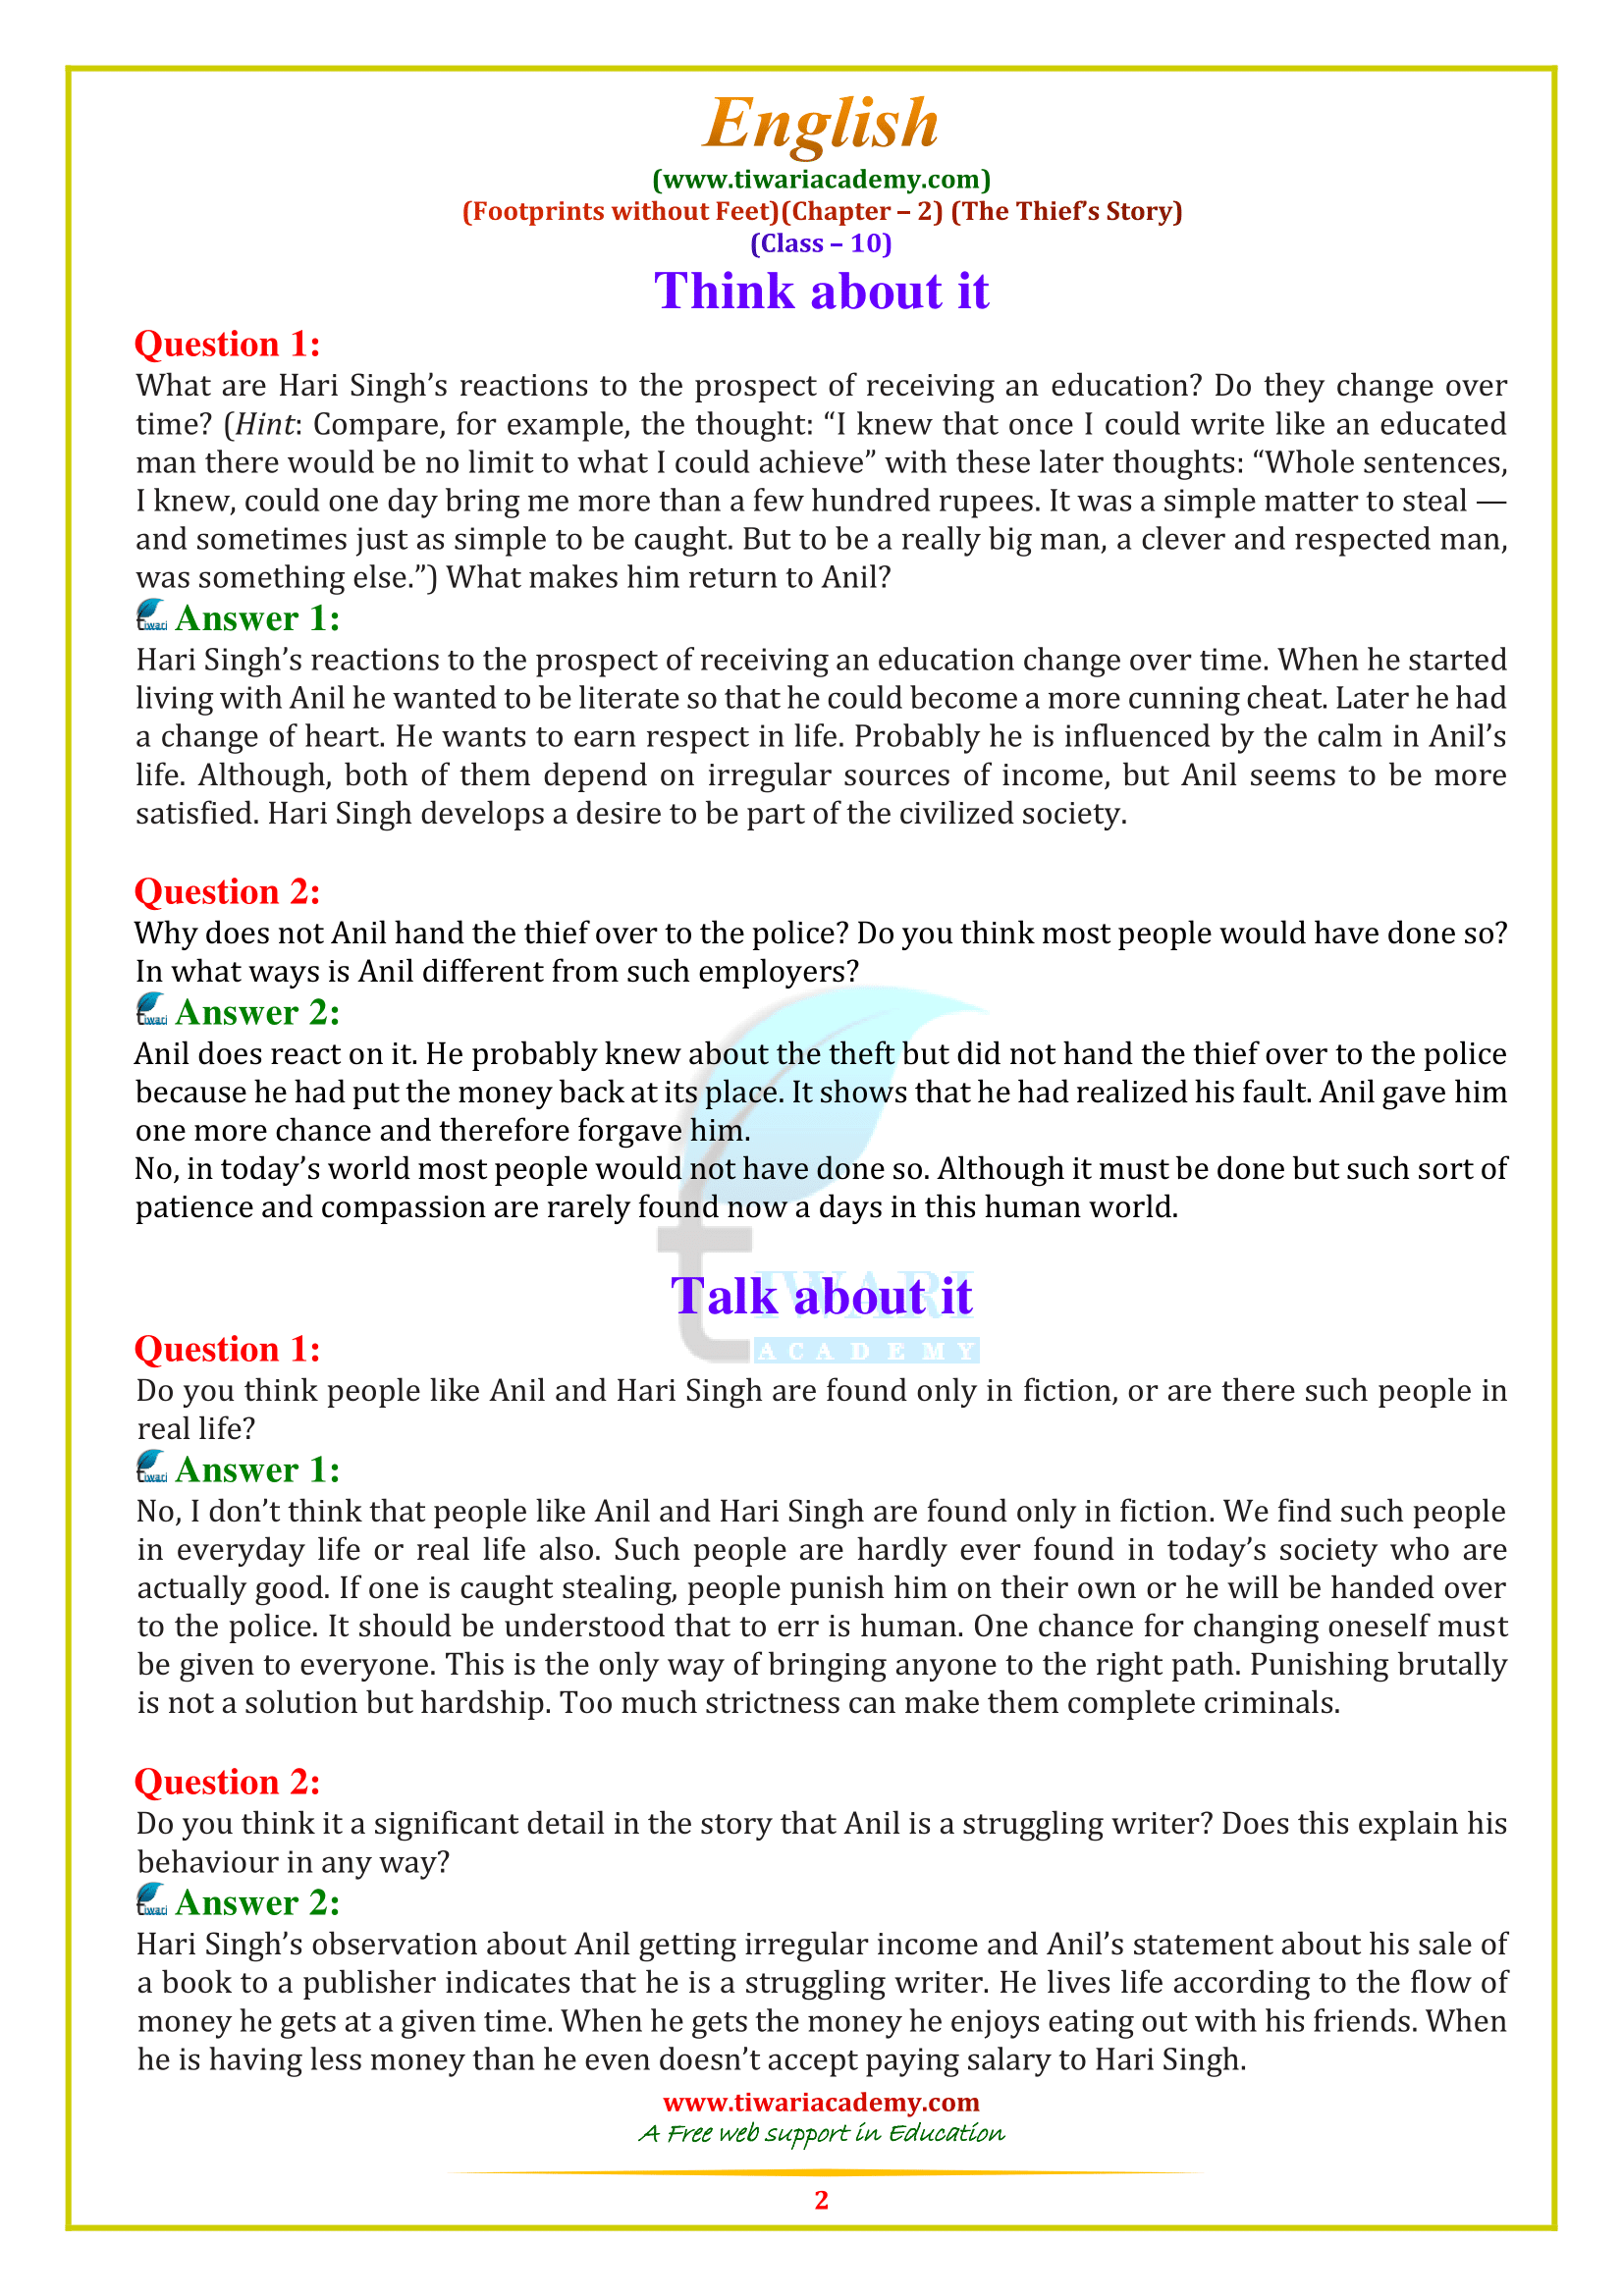 NCERT Solutions for Class 10 English Footprints without feet chapter 2